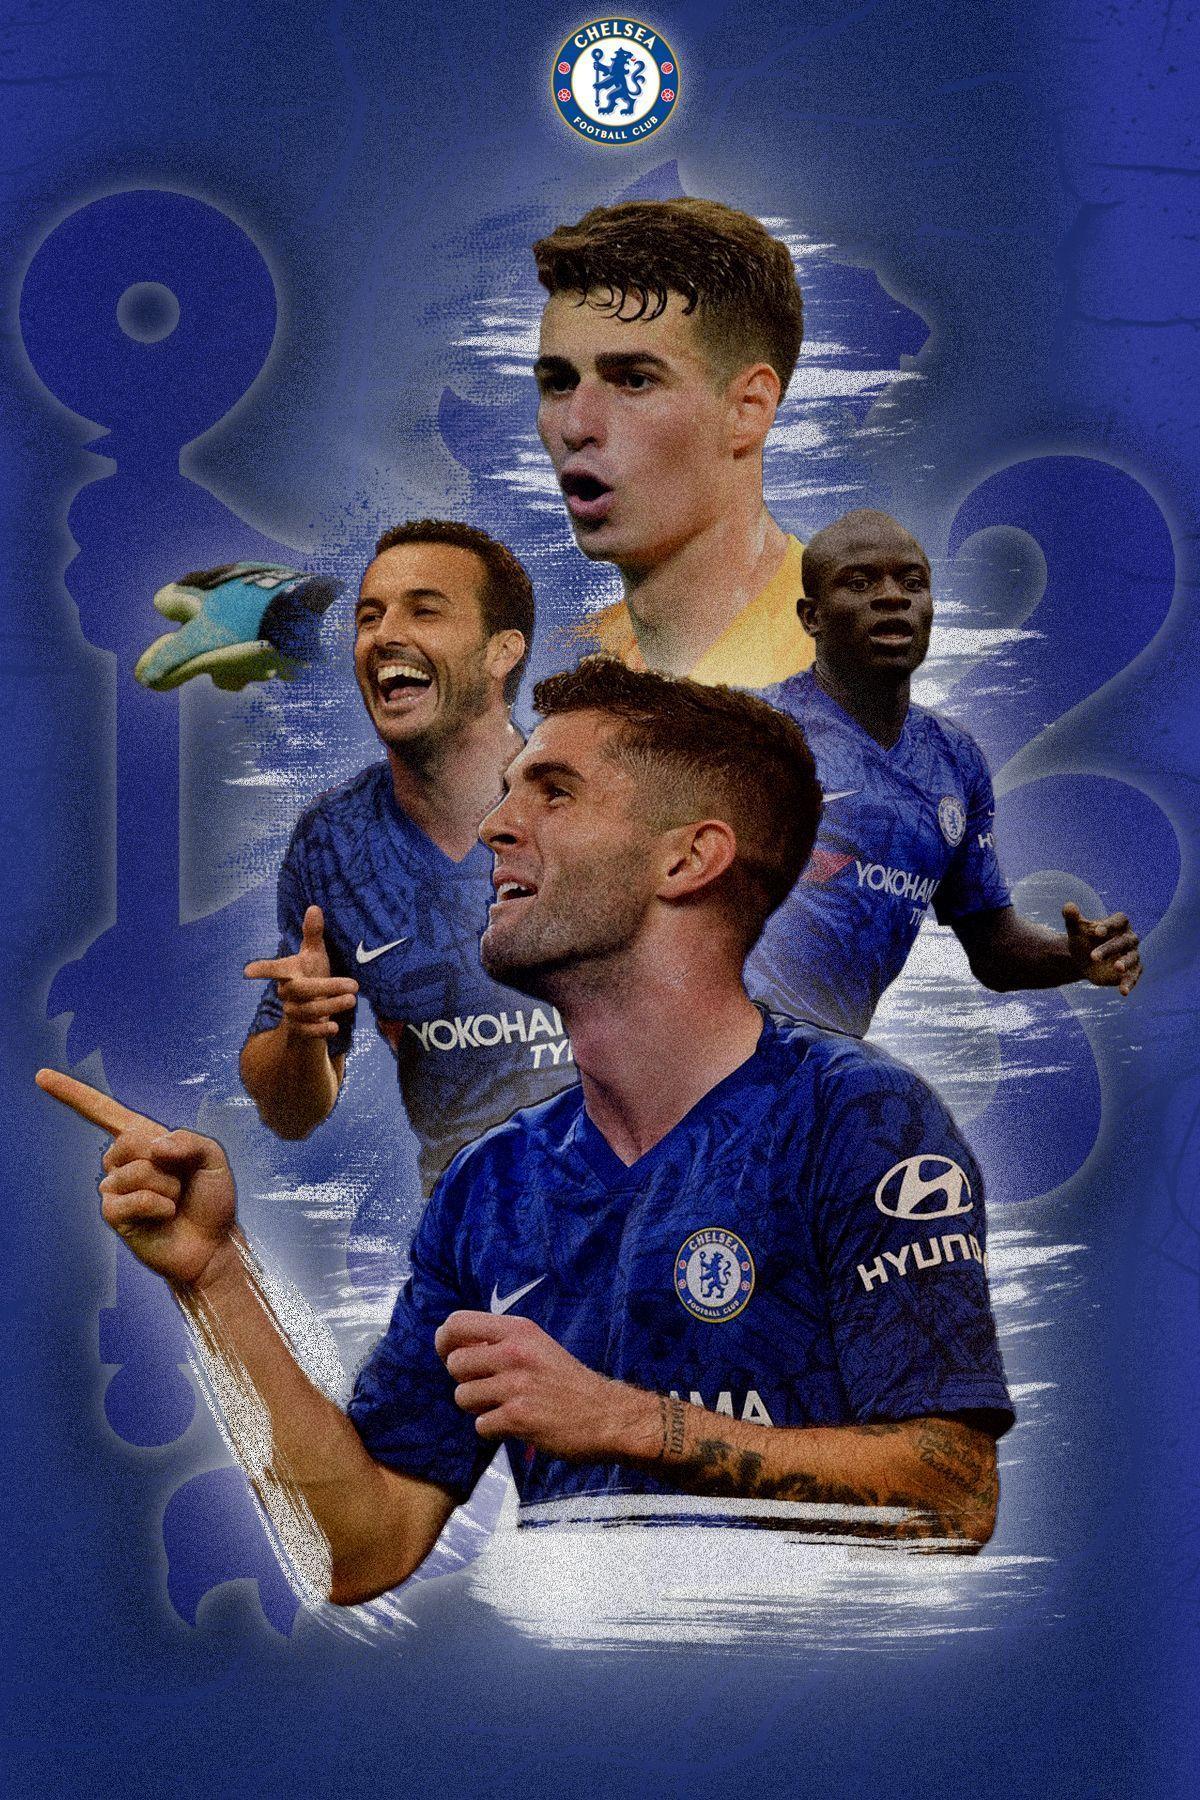 Anyone need a new Chelsea Iphone Wallpaper? : r/chelseafc